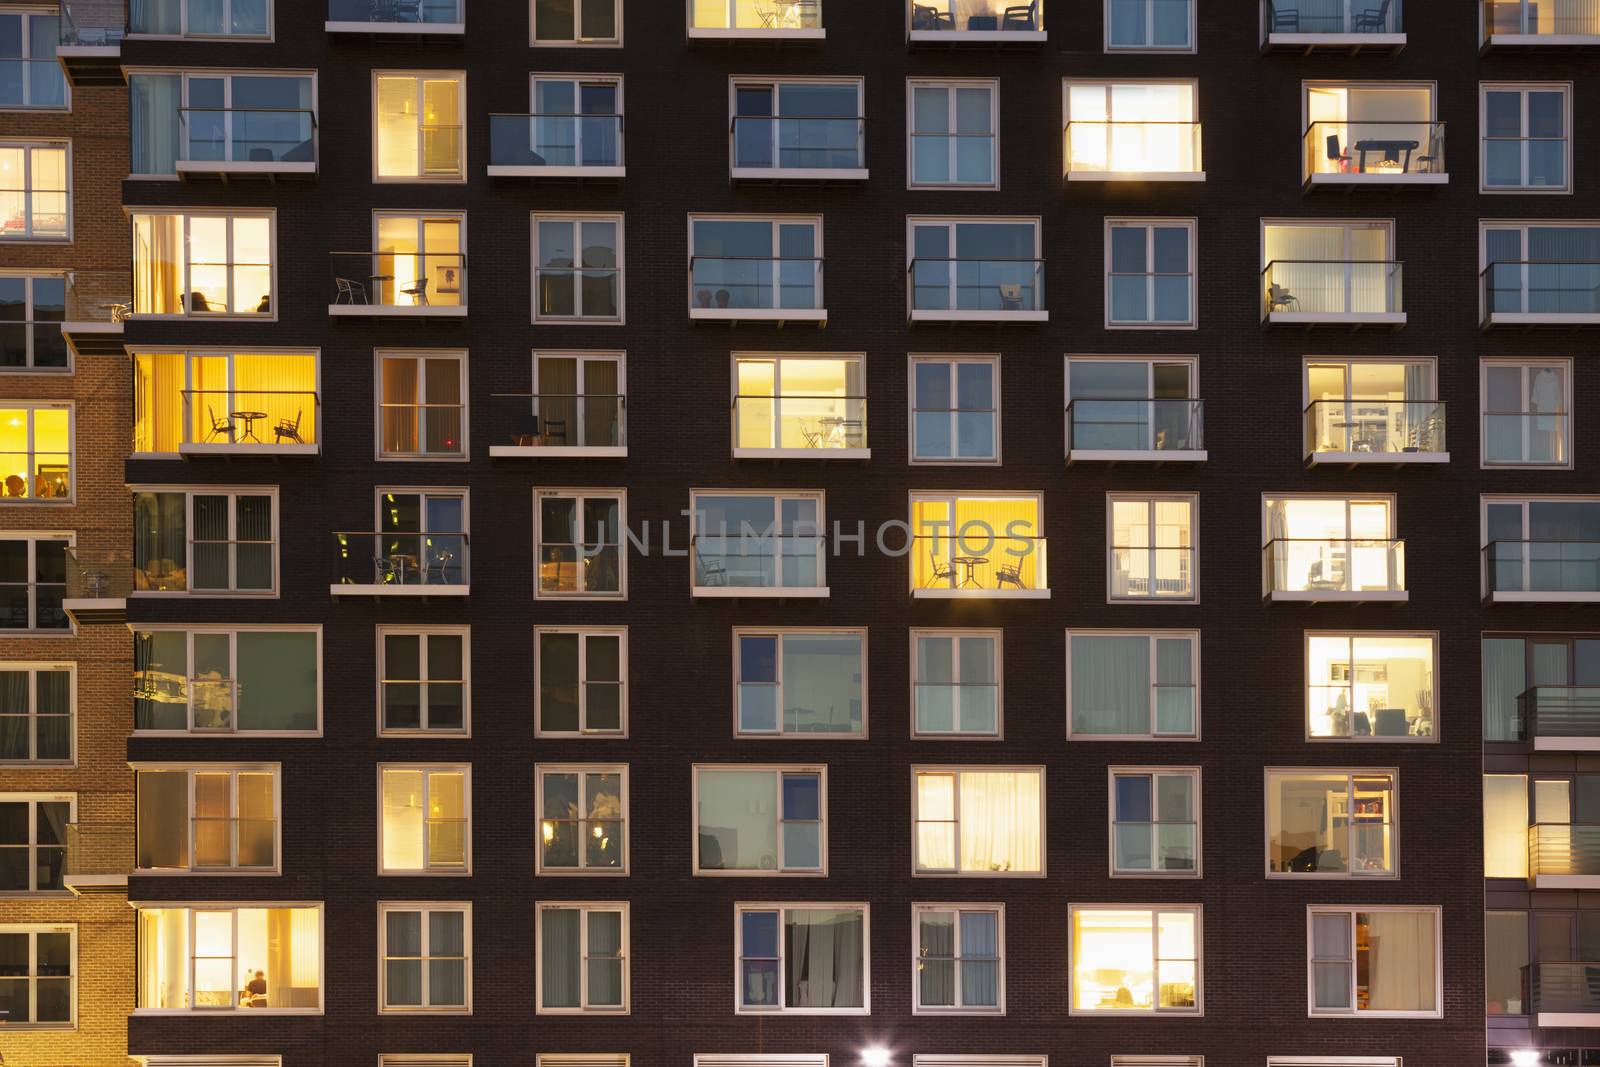 Modern apartment block at dusk by conceptualmotion